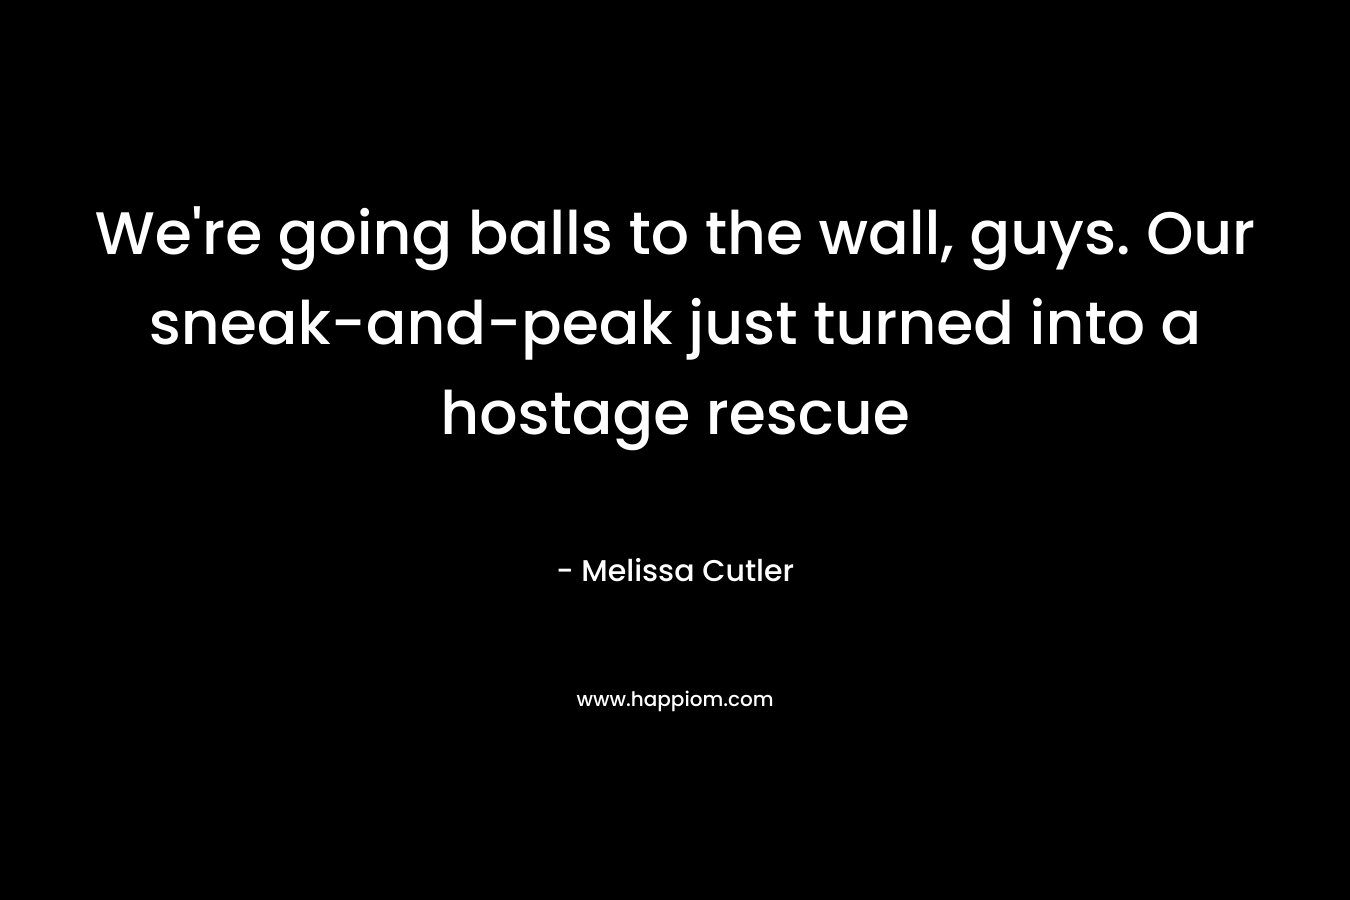 We’re going balls to the wall, guys. Our sneak-and-peak just turned into a hostage rescue – Melissa Cutler